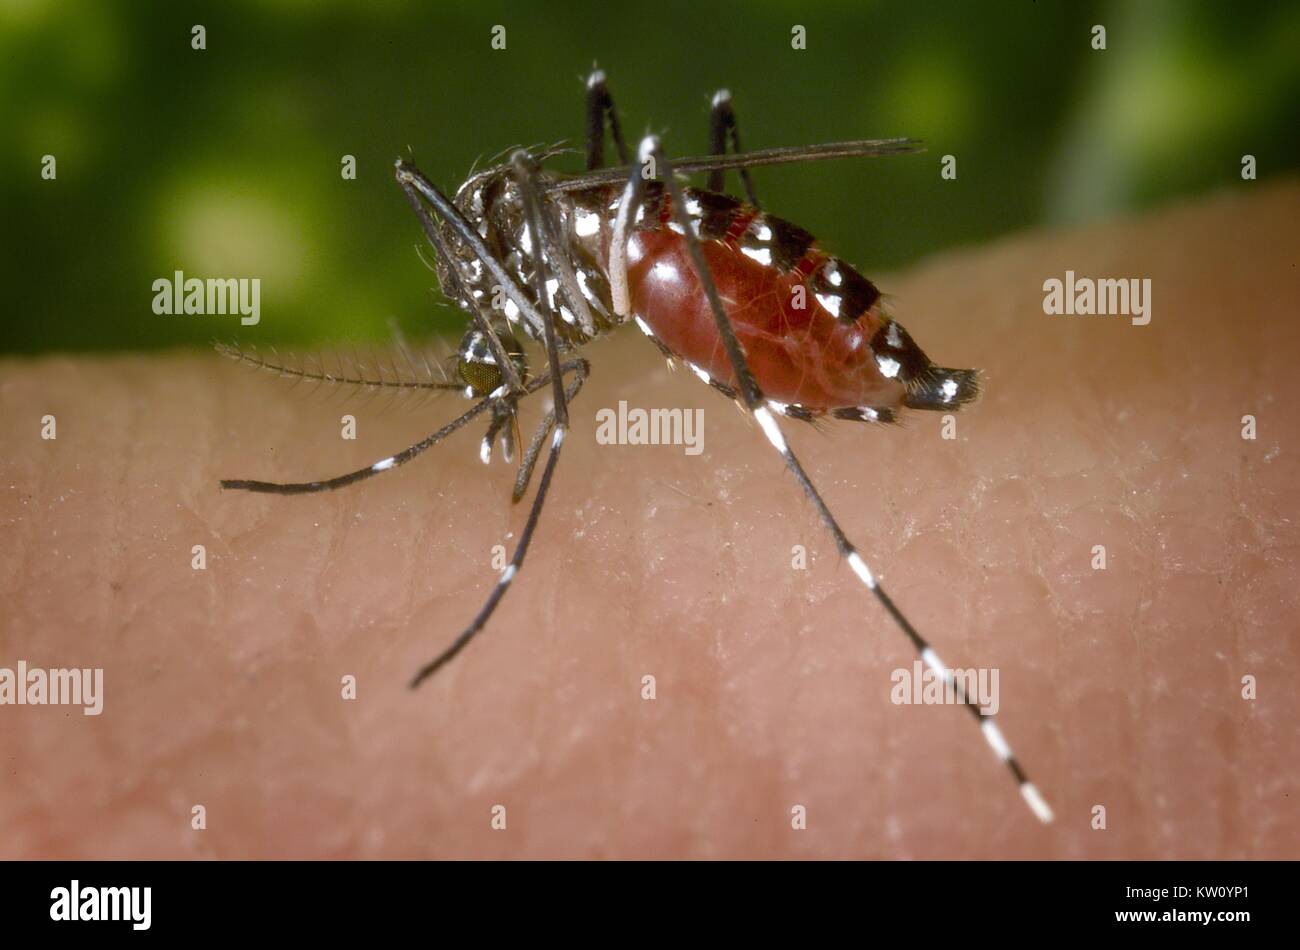 A blood-engorged female Aedes albopictus mosquito feeding on a human host. Under successful experimental transmission, Aedes albopictus has been found to be a vector of West Nile virus. Aedes is a genus of the Culicine family of mosquitoes. Image courtesy CDC, 2002. Stock Photo